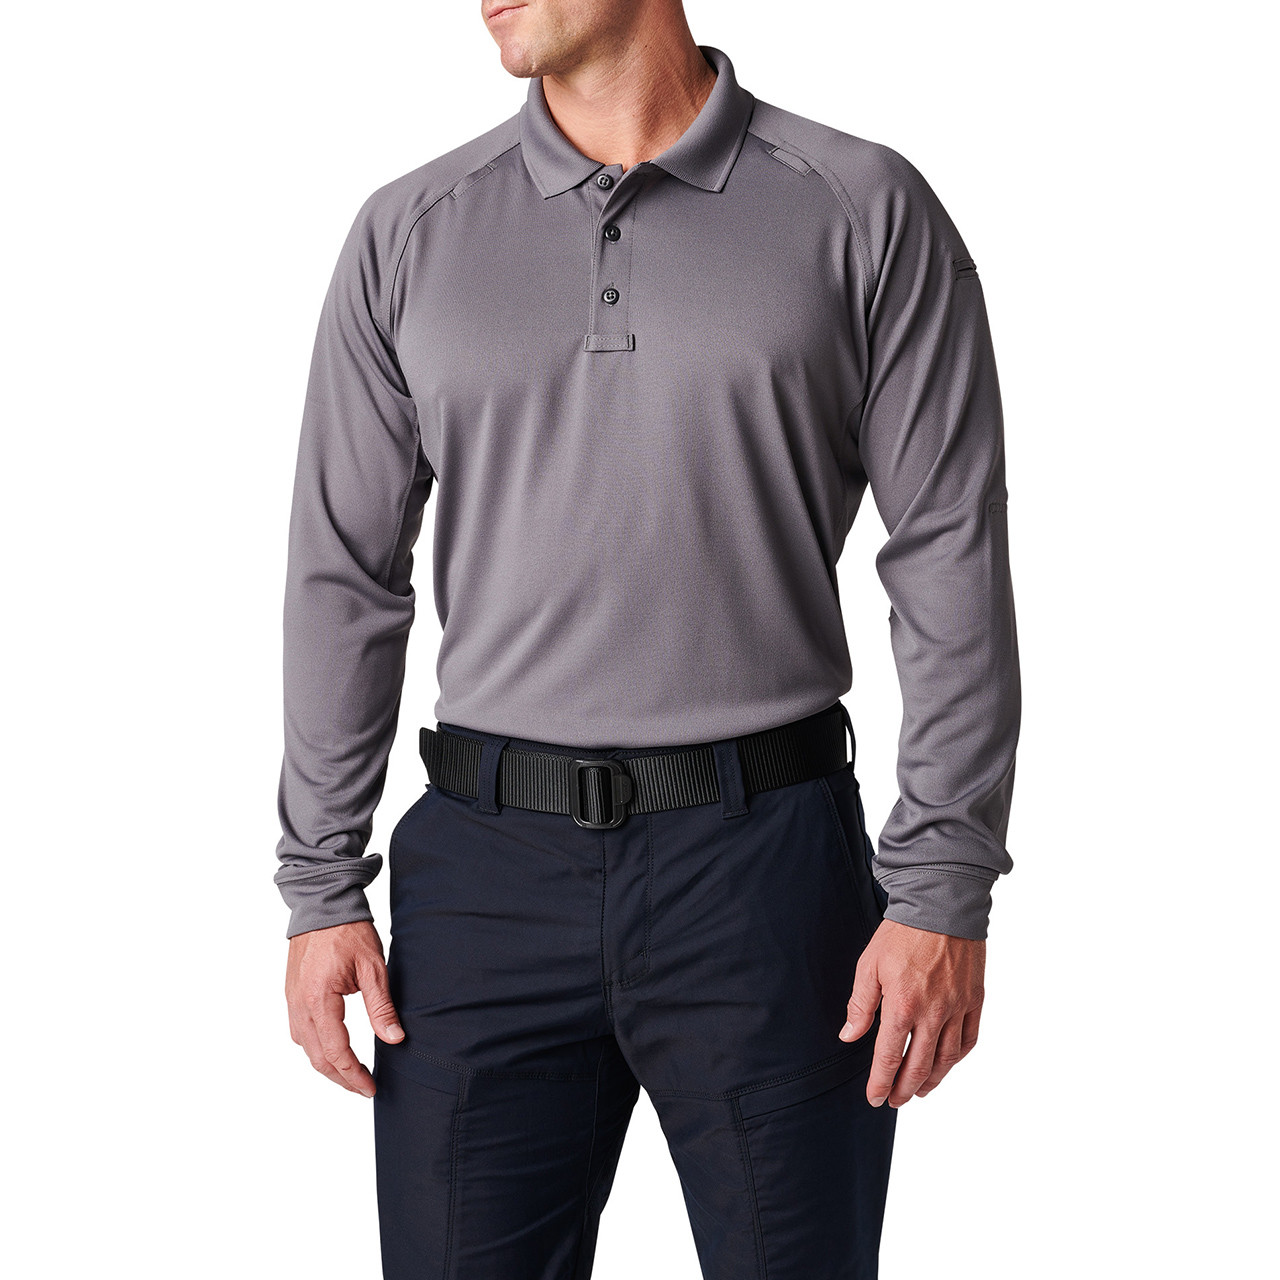 Under Armour Men's Tactical Performance Polo 2.0 Long Sleeve Black